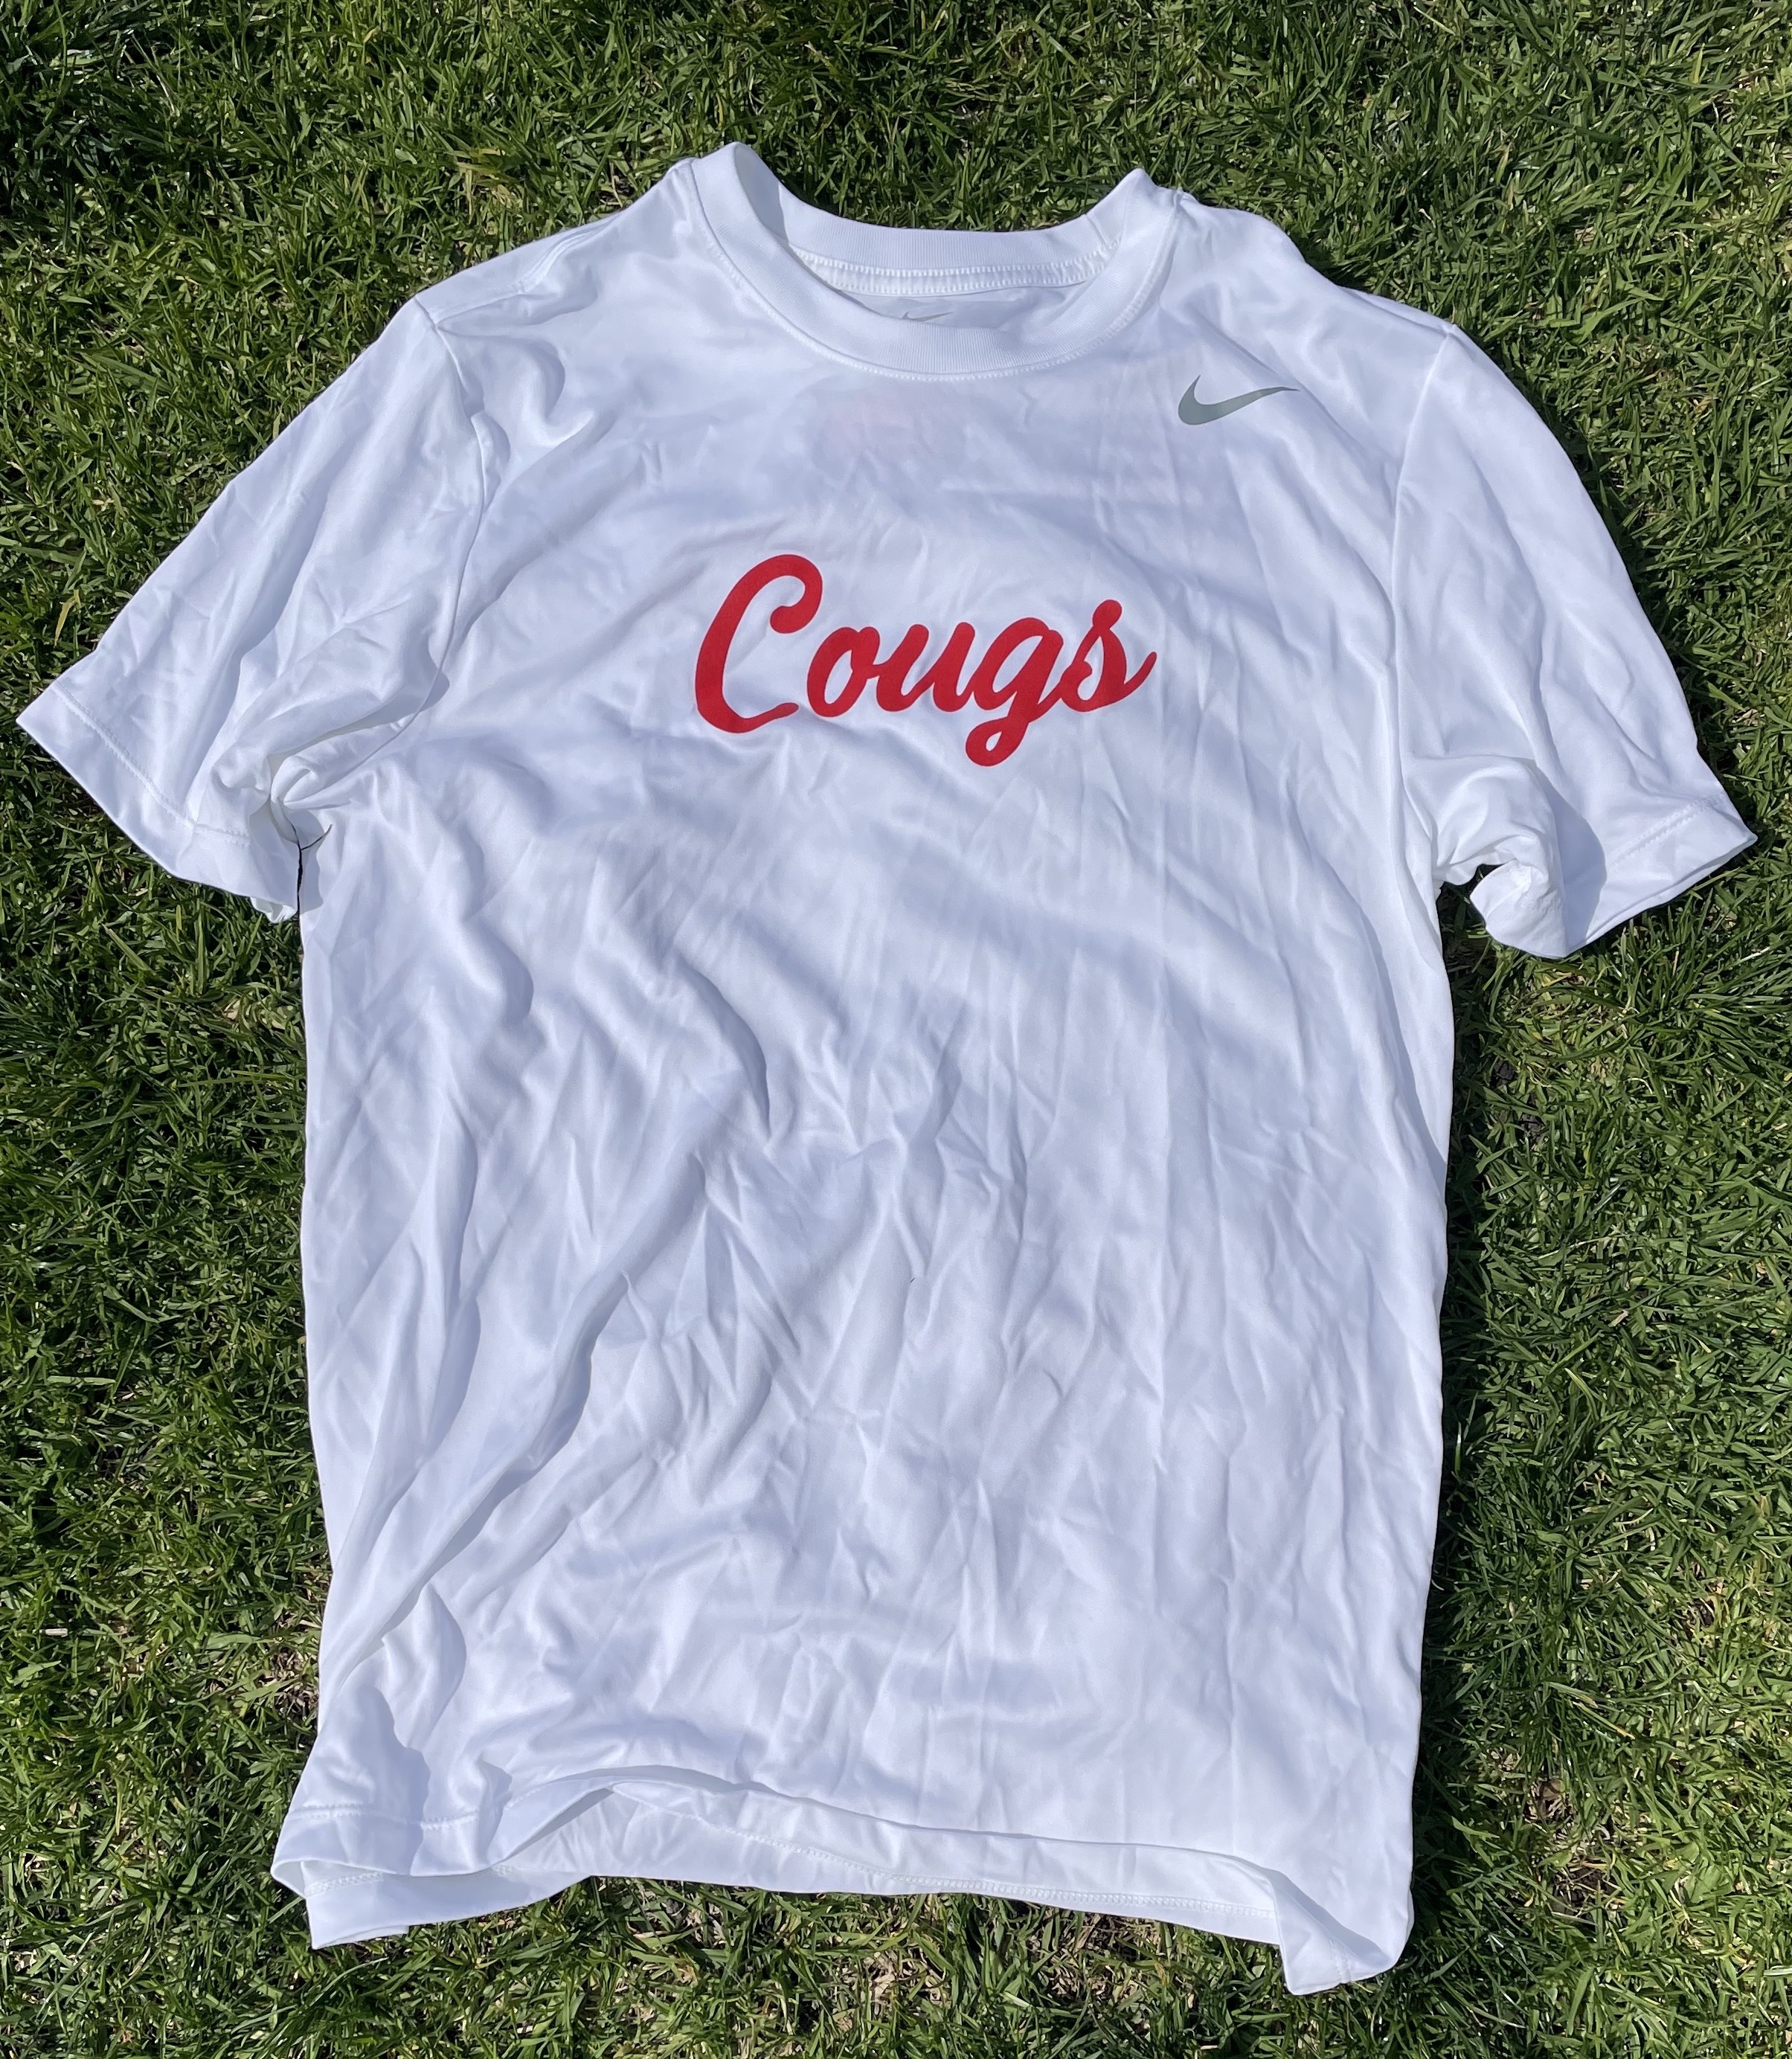 Cougs white T-shirt